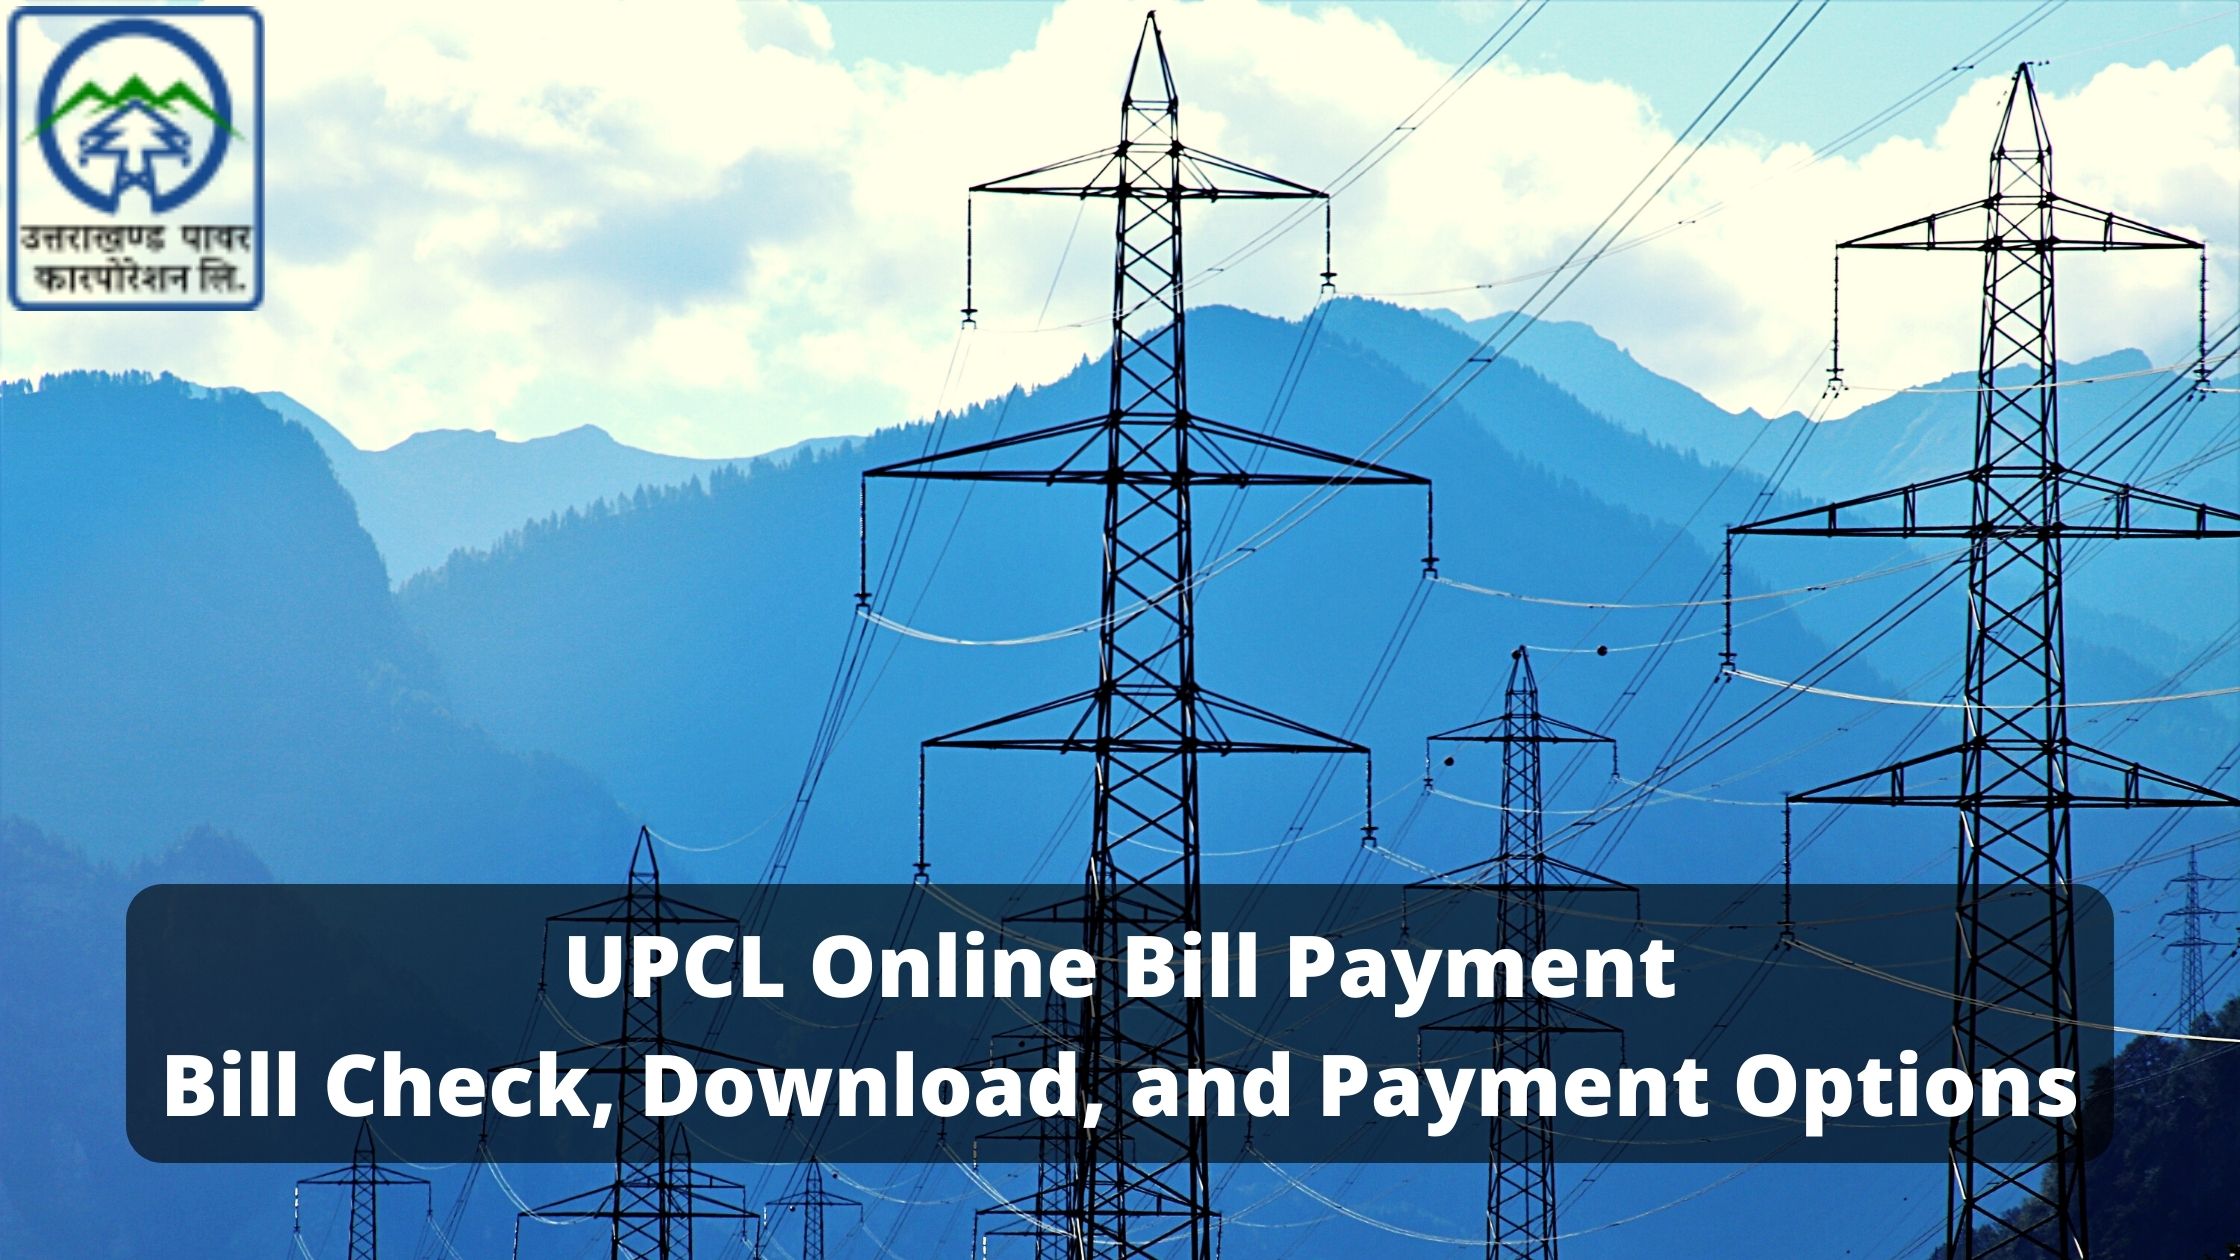  UPCL Online Bill Payment: Bill Check, Download, and Payment Options